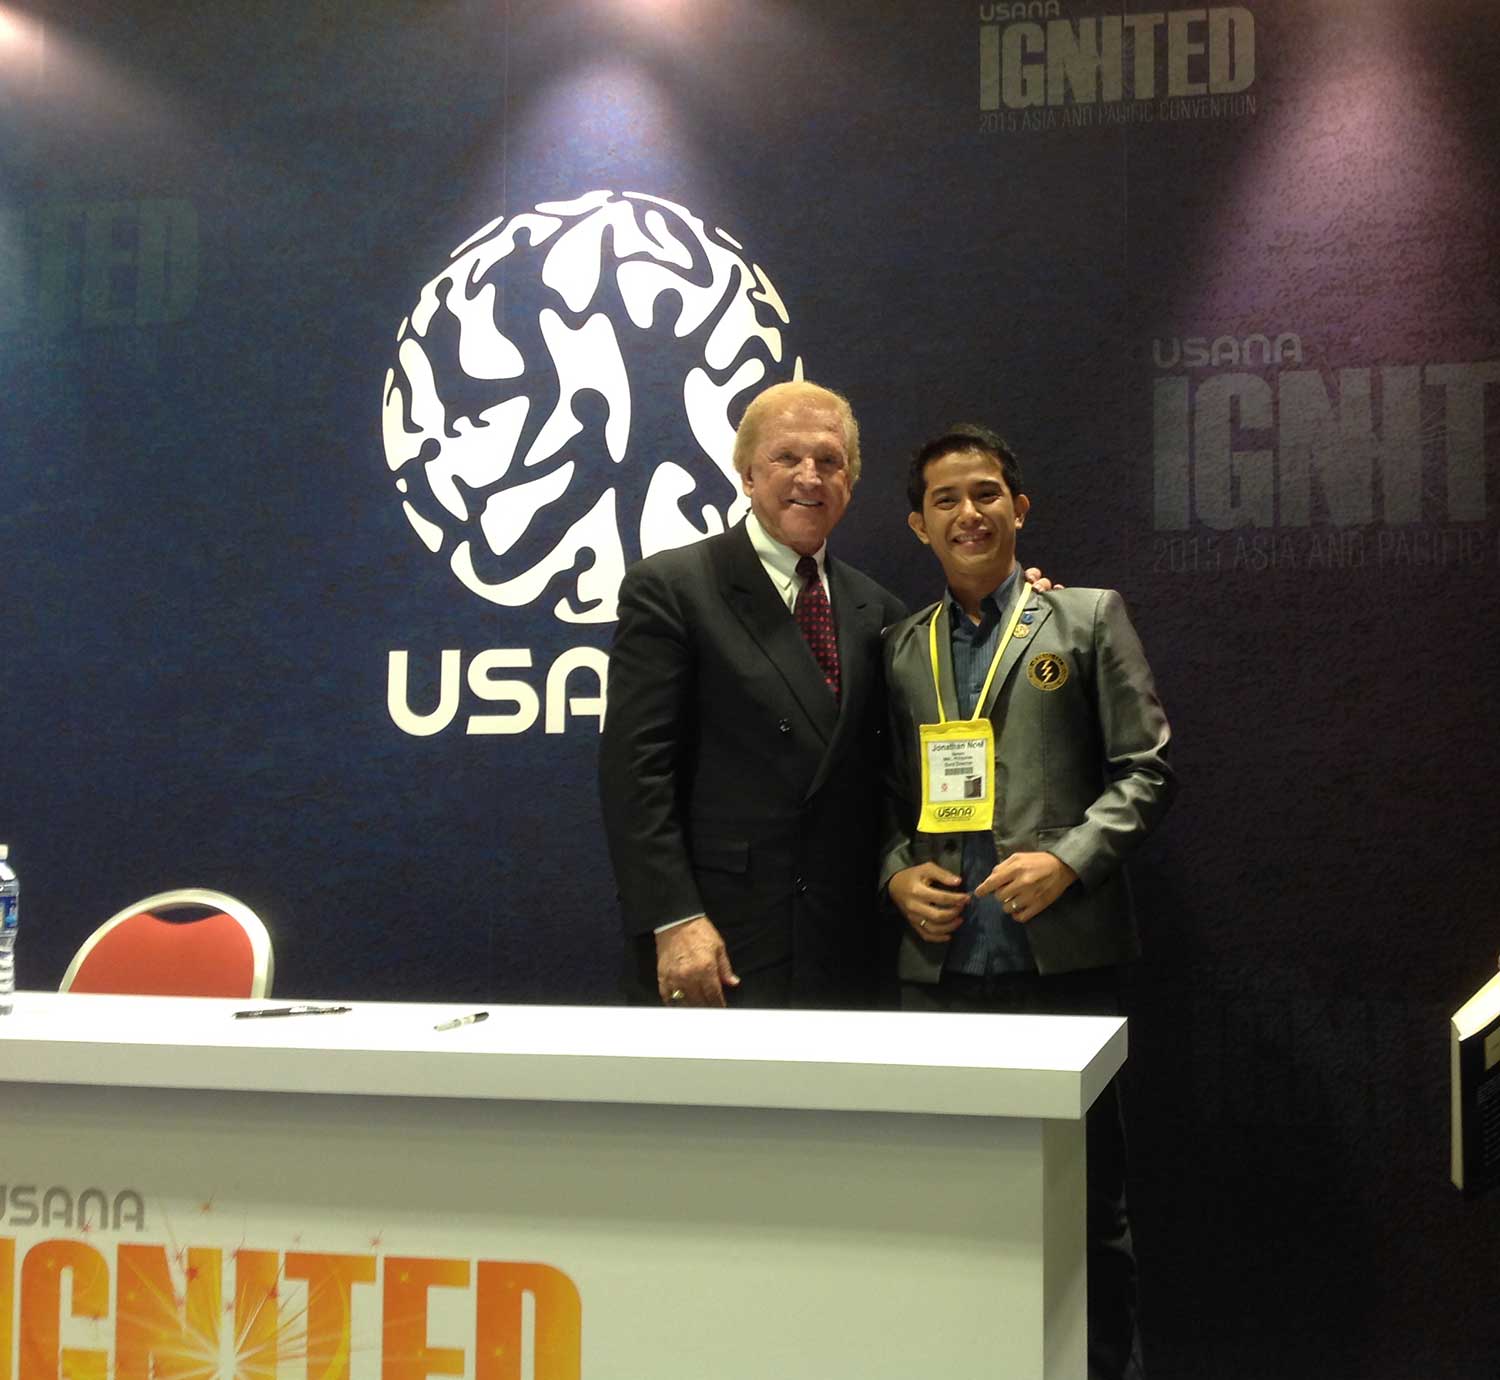 Photo with Dr. Denis Waitley at USANA Convention held in Singapore